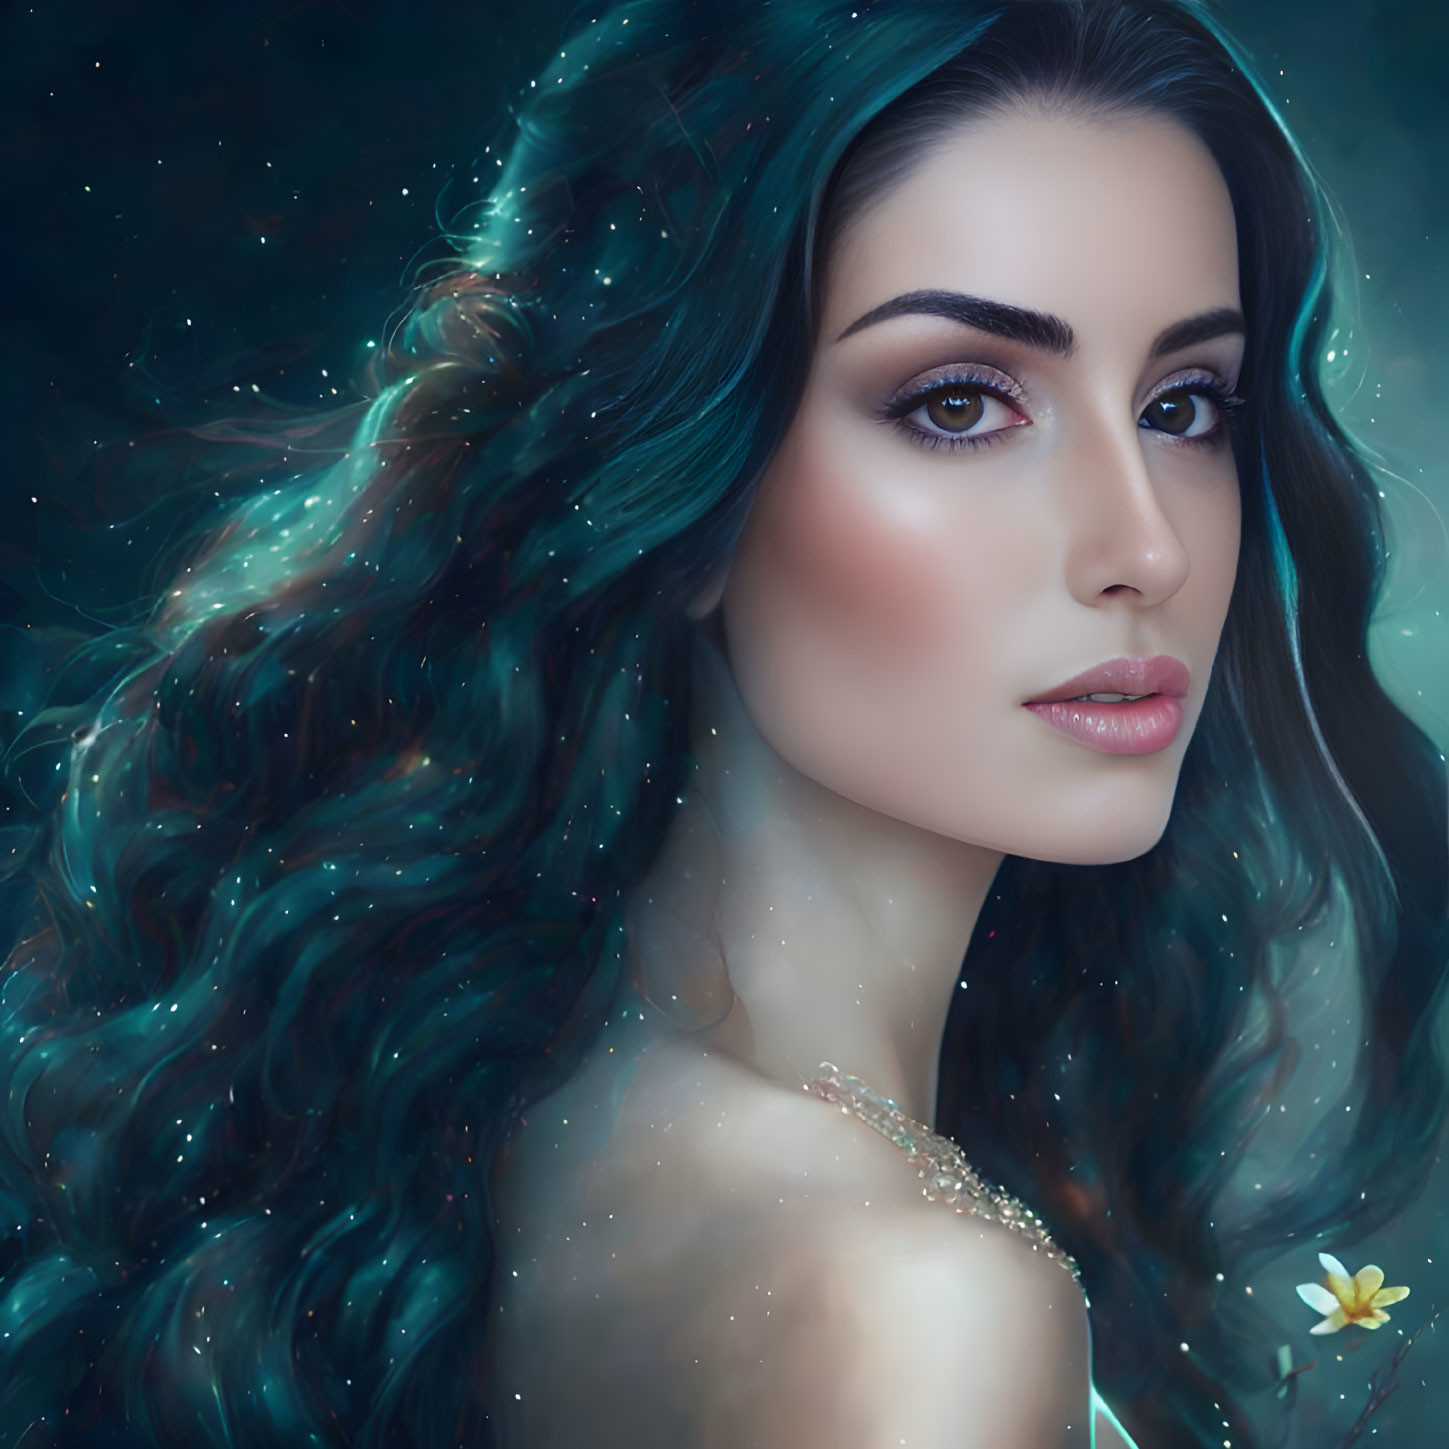 Portrait of woman with flowing teal hair against starry background & floral accent